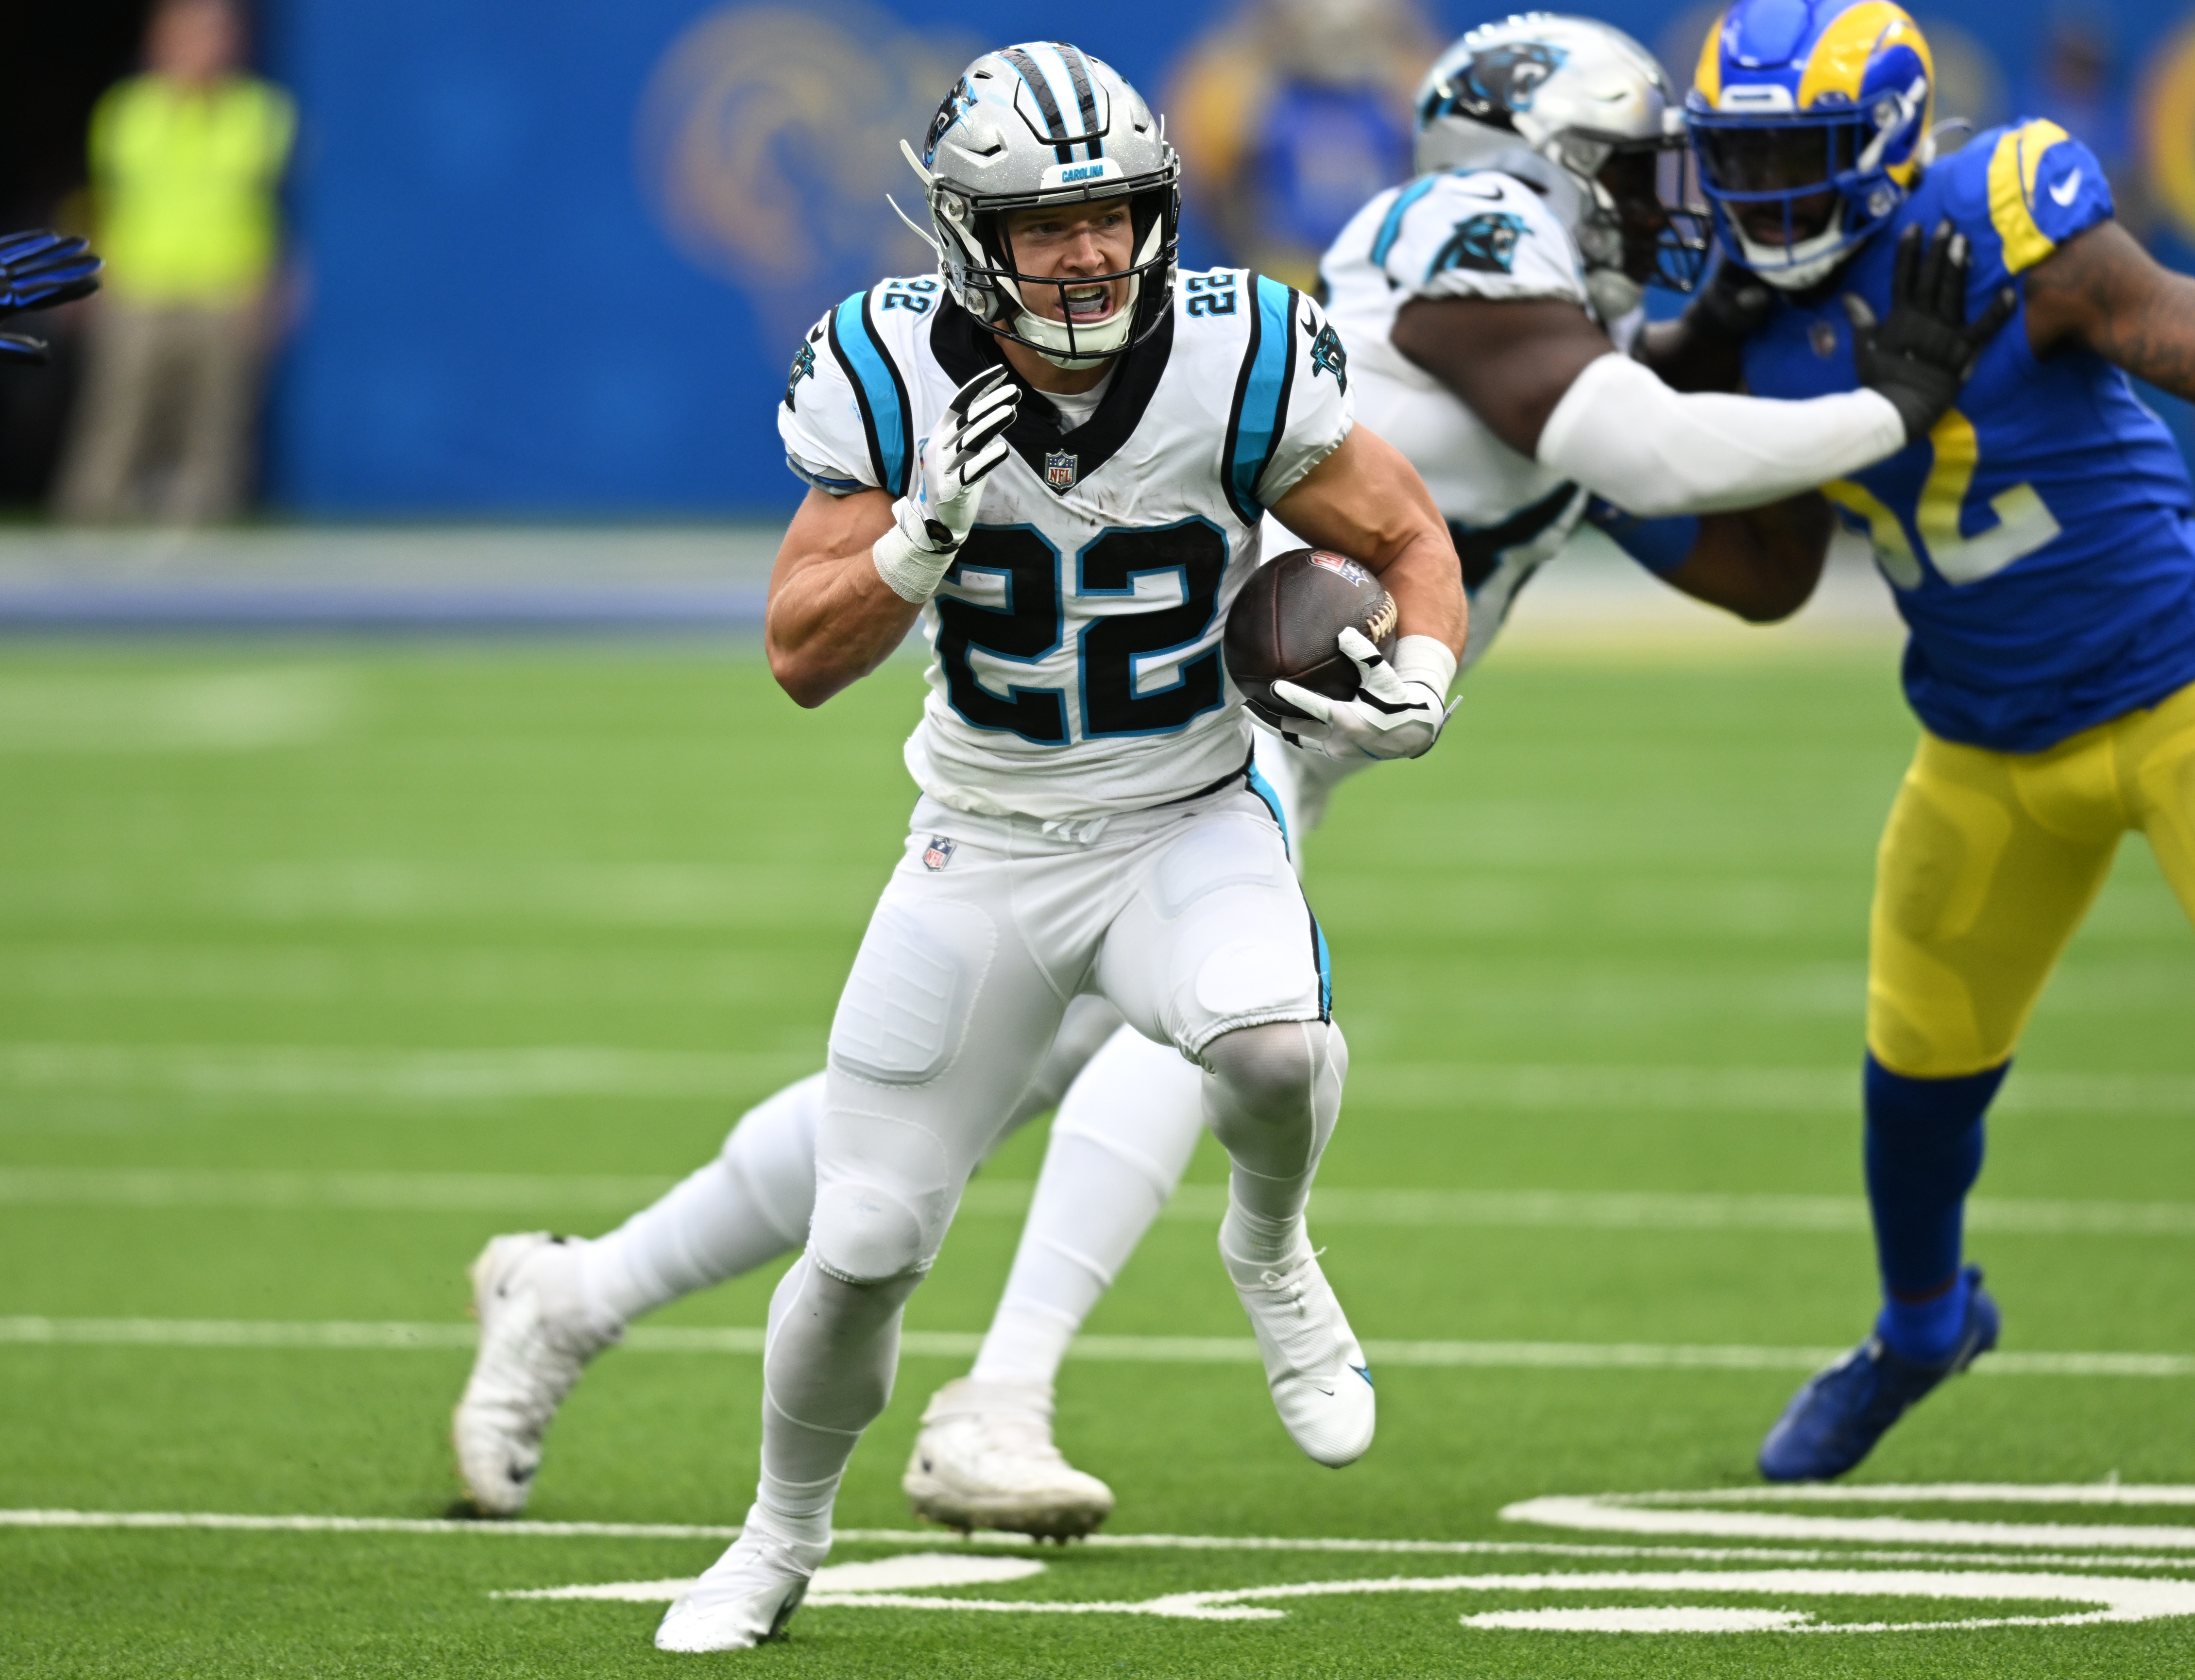 Running back Christian McCaffrey (#22) of the Carolina Panthers runs with the ball in the game against the Los Angeles Rams at SoFi Stadium in Inglewood, California, October 16, 2022. /CFP